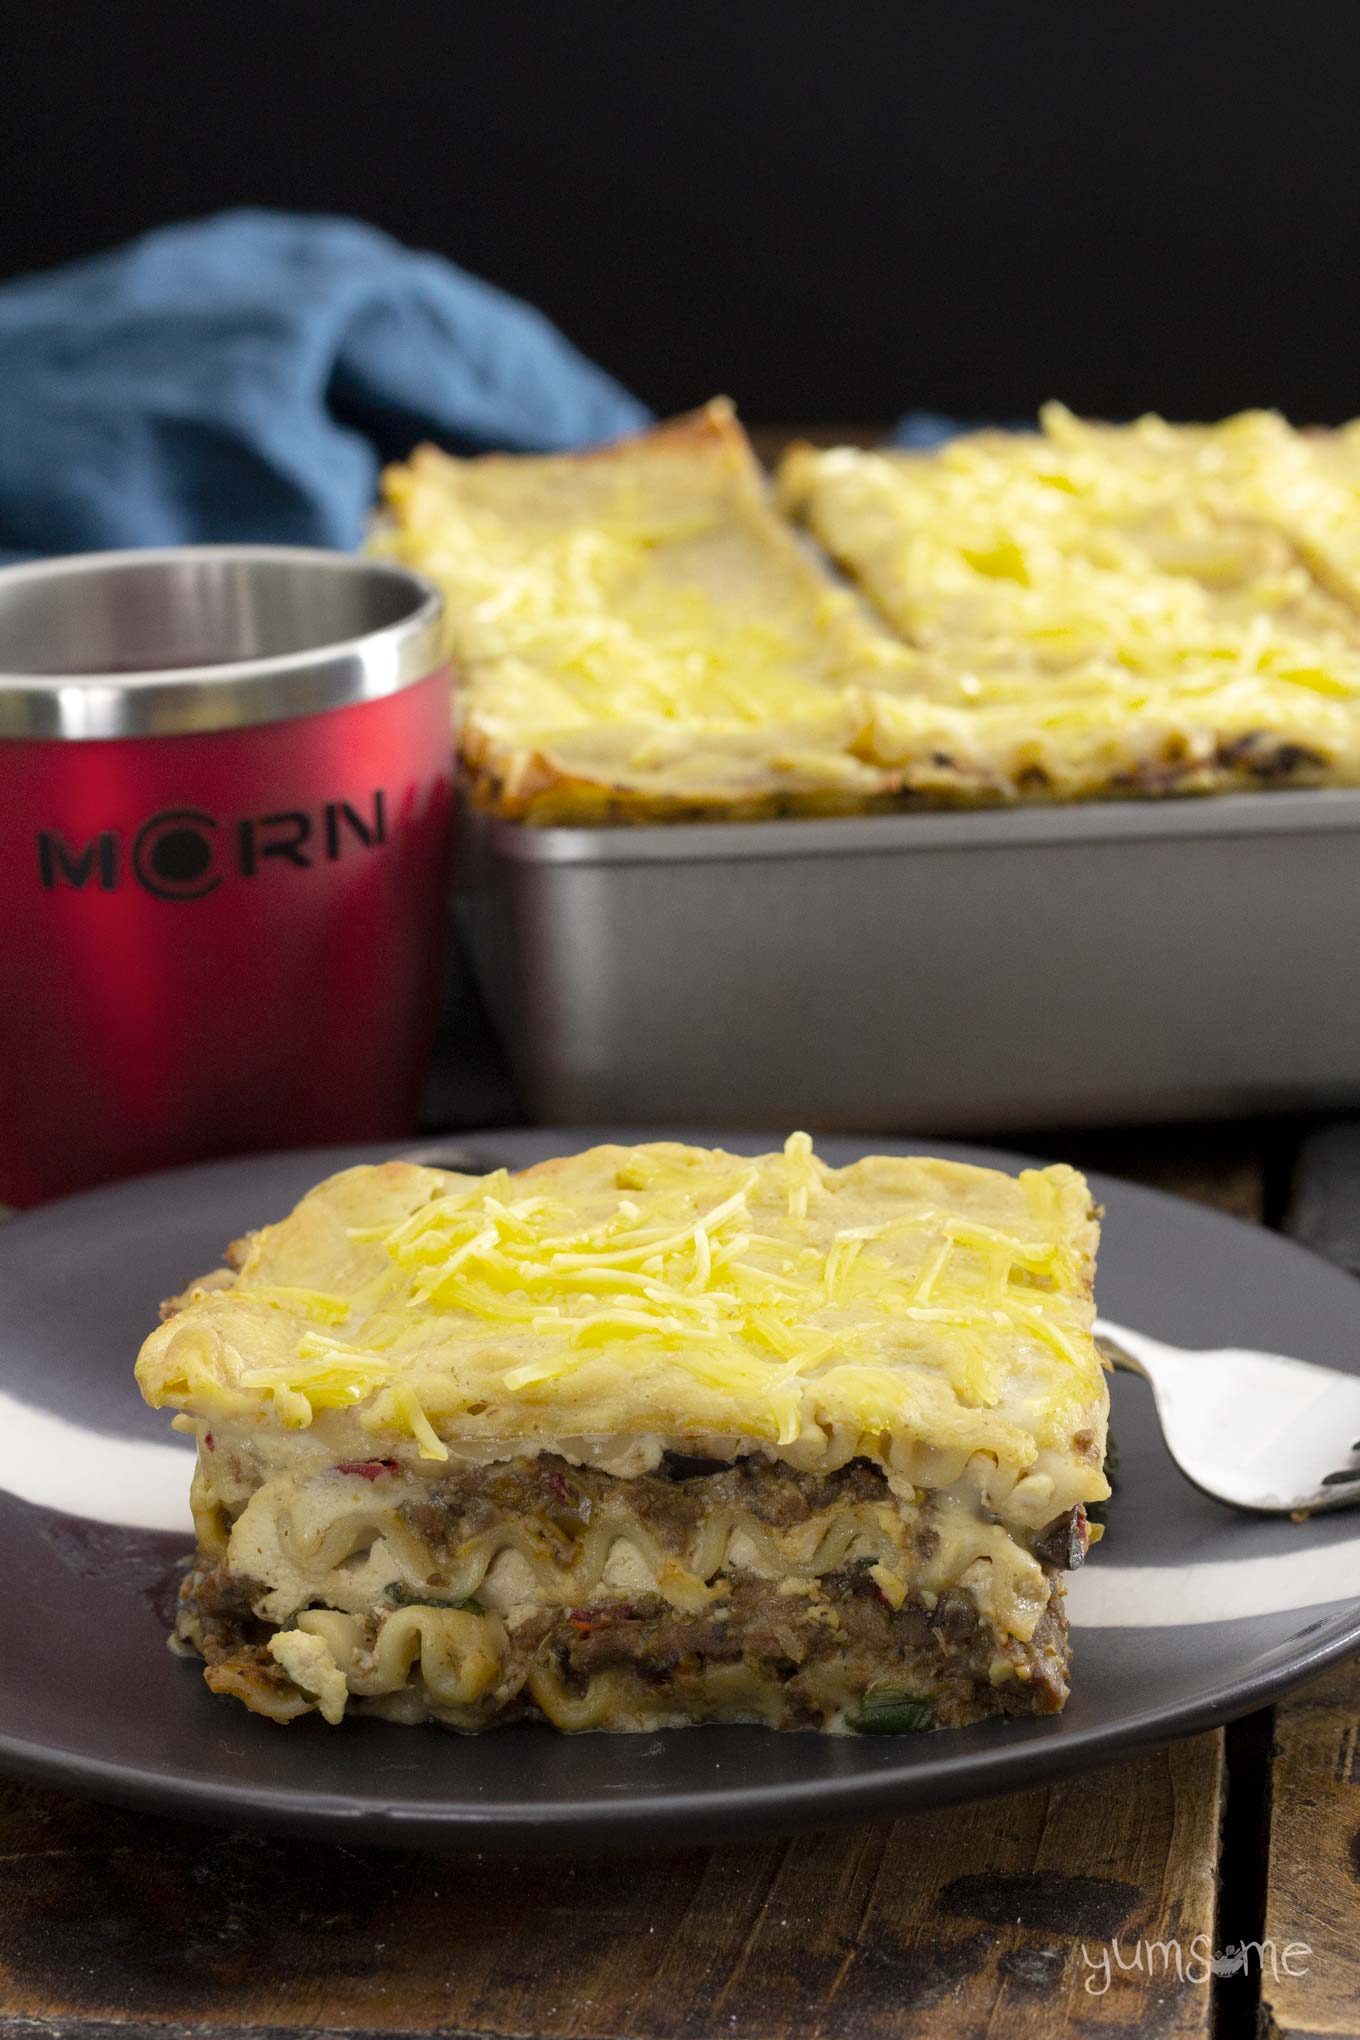 A black plate with a slice of Mariner Valley lasagna, with a tray of lasagna in the background, next to a red MCRN cup.